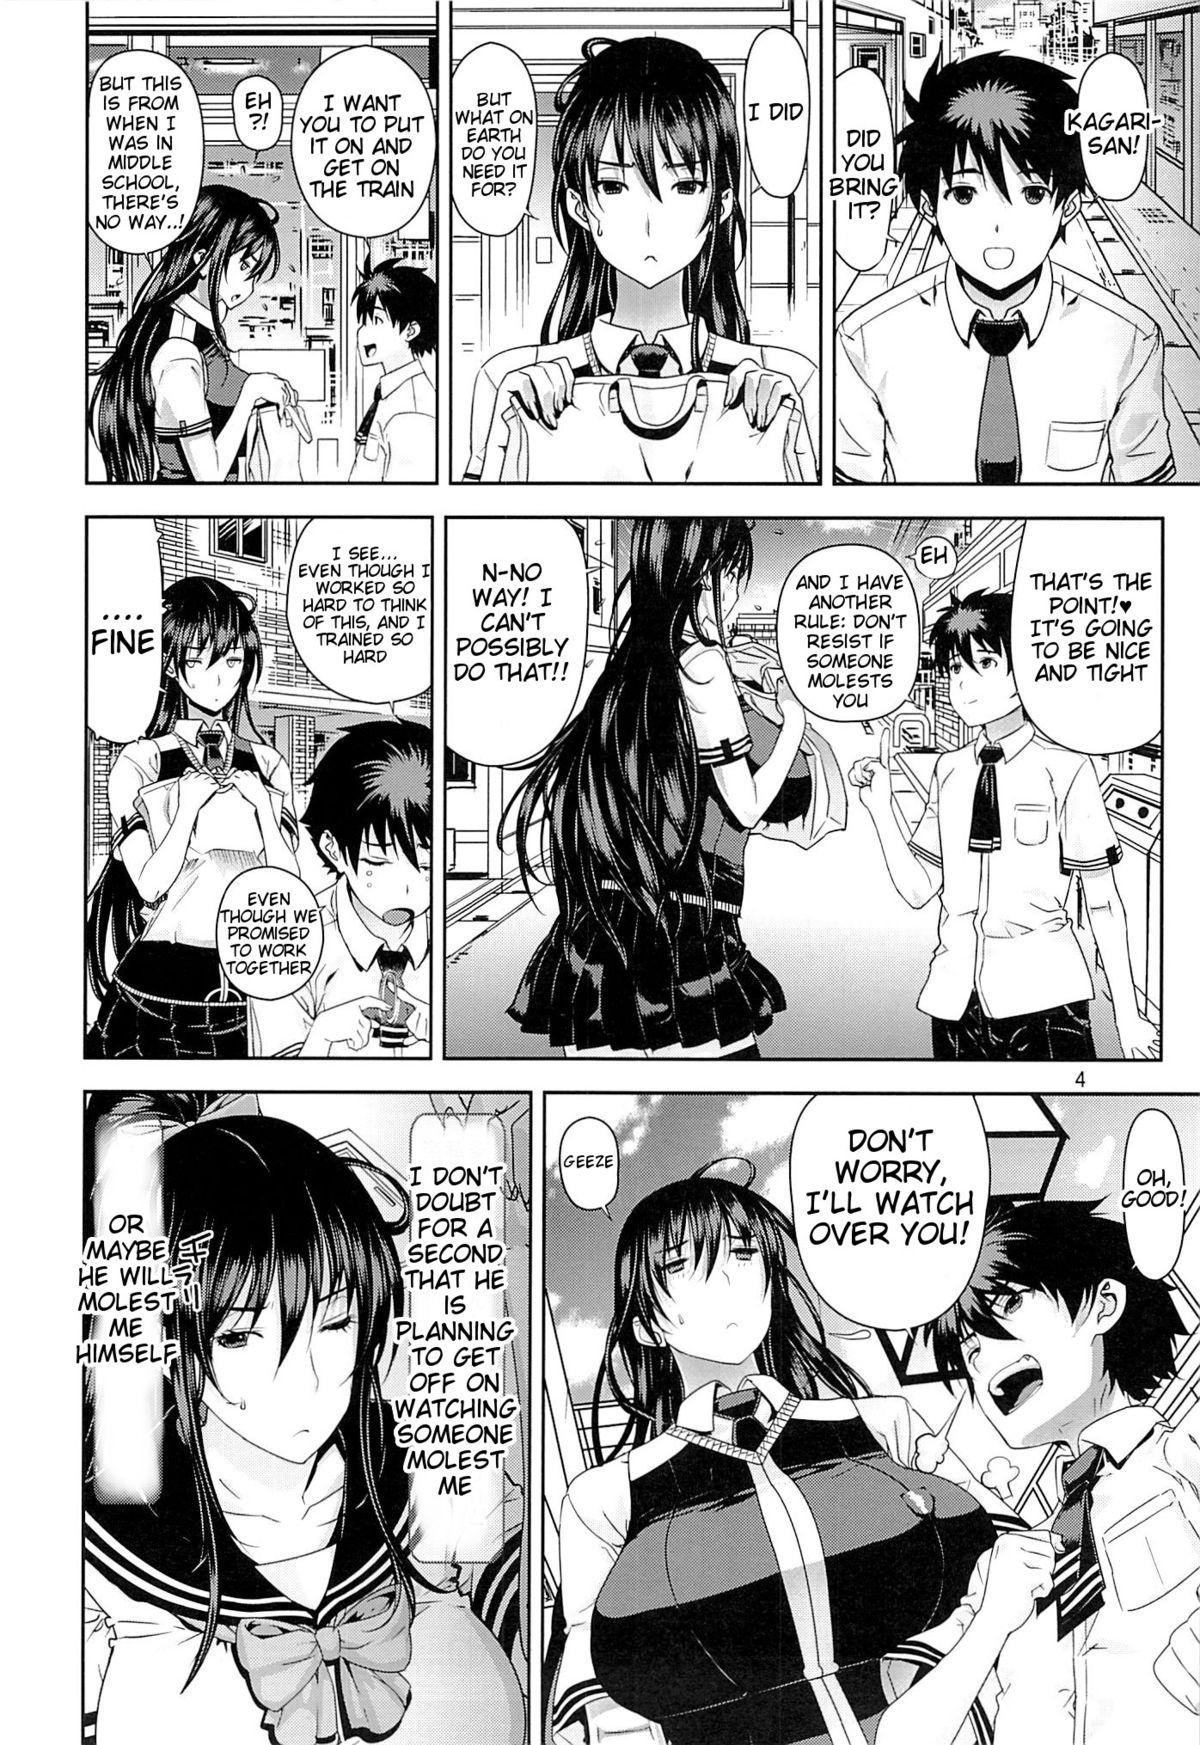 Girlfriends Leopard Hon 21 no 2 - Witch craft works Brother Sister - Page 3